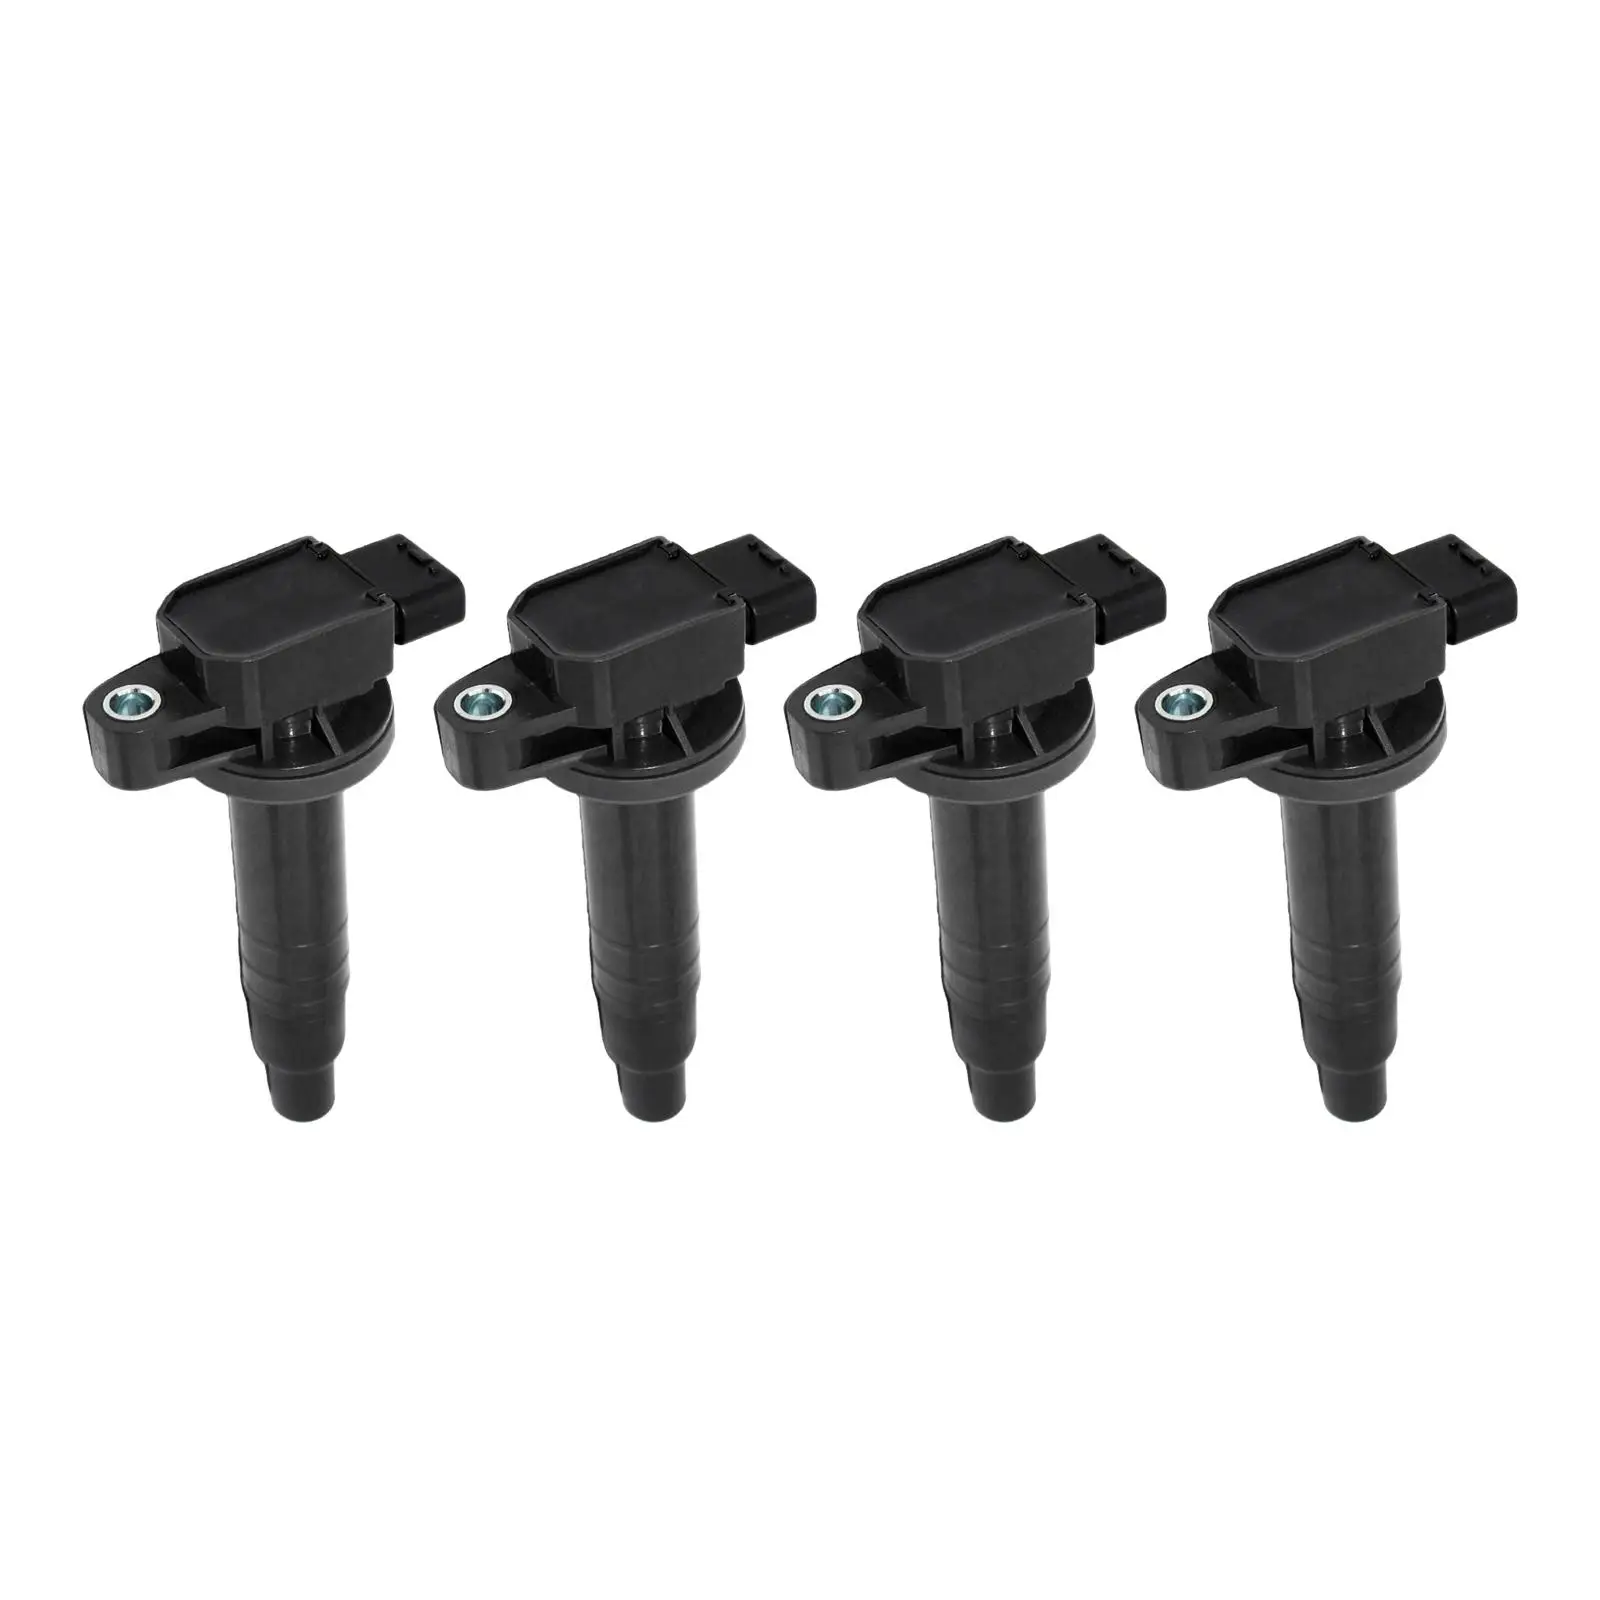 4x Ignition Coils 90919-02240 Repair Parts Durable Easy to Install Replacement Accessories for Toyota 1.5L for prius Echo Yaris